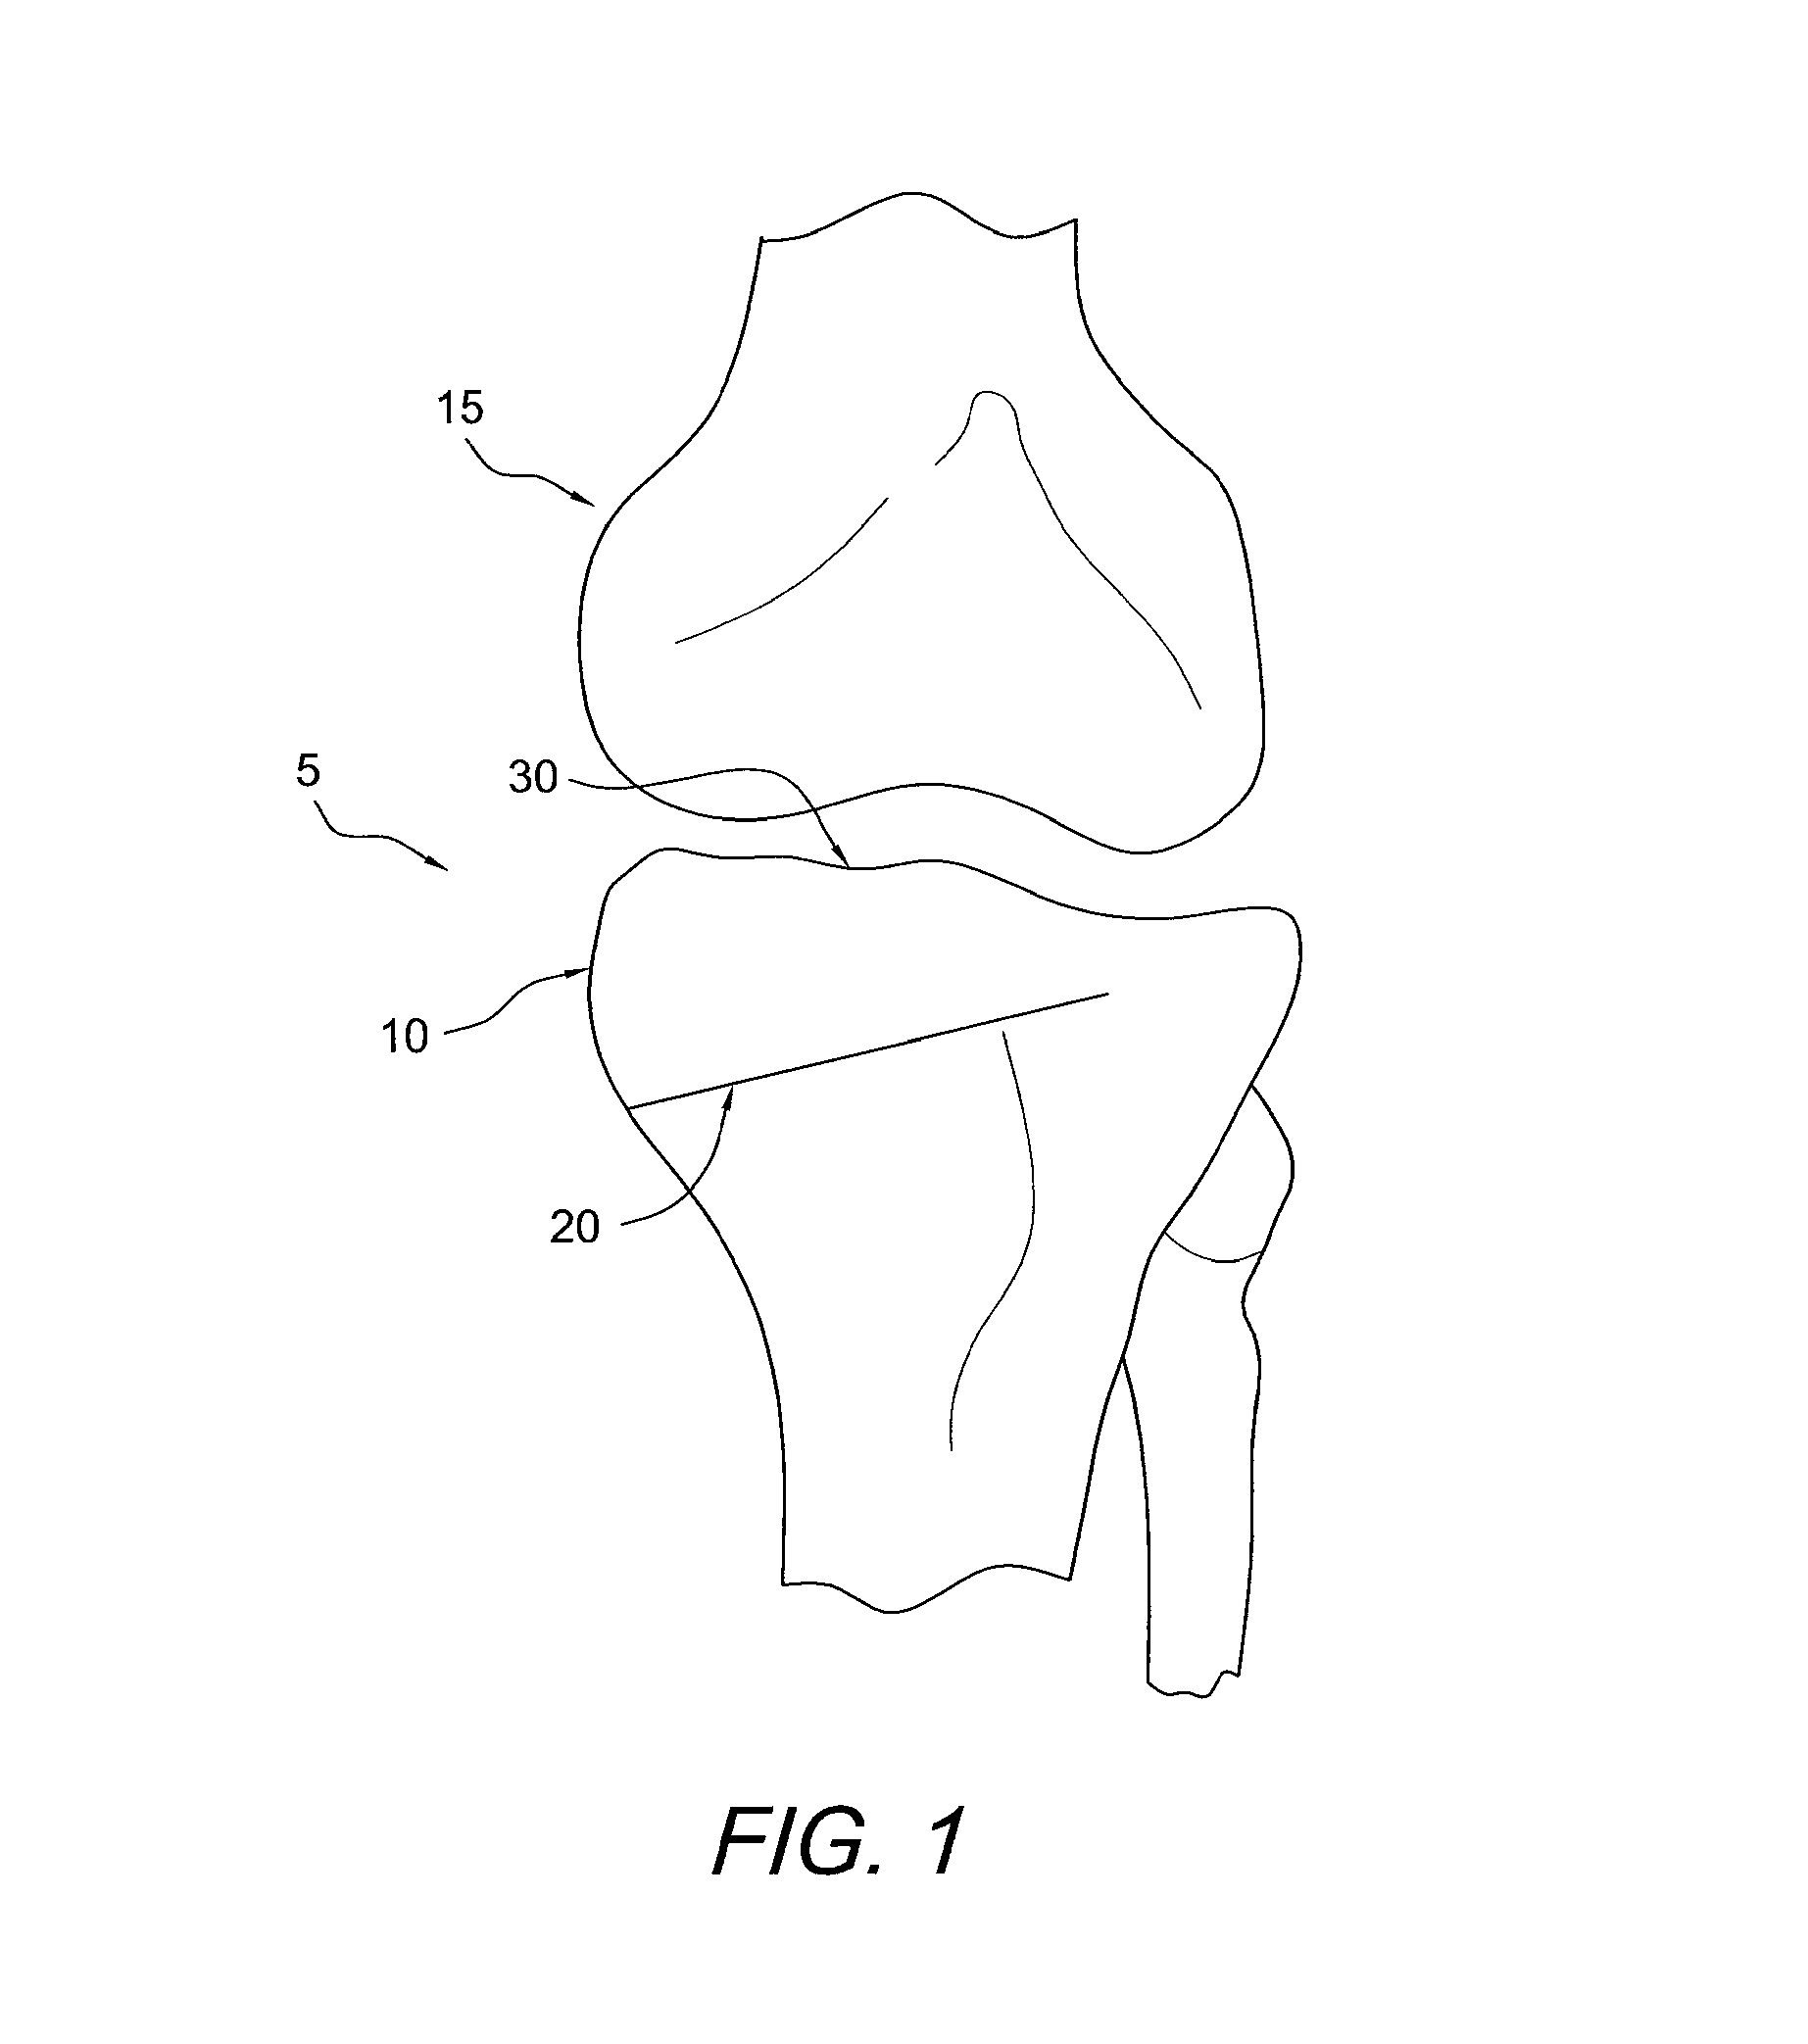 Method for performing an open wedge, high tibial osteotomy